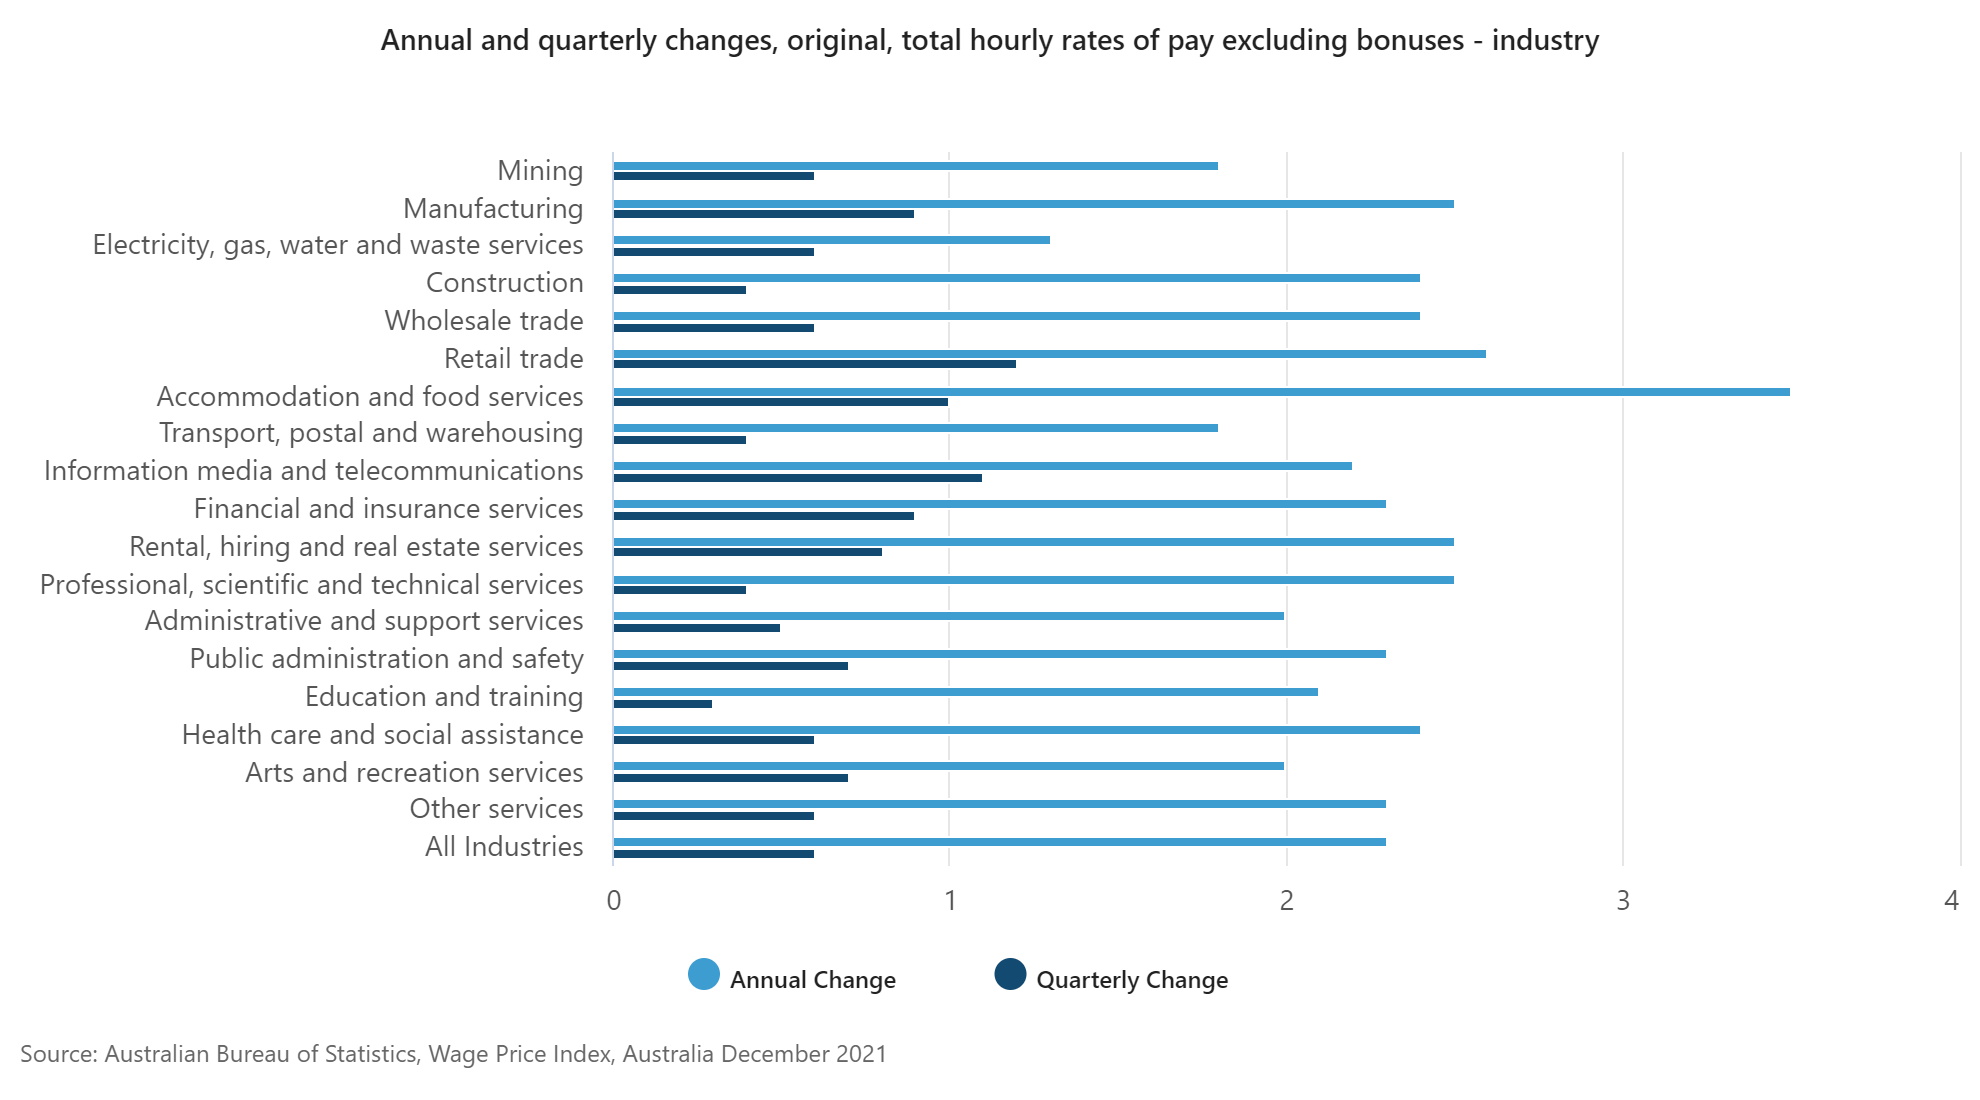 Annual and quarterly changes in total hourly rates of pay excluding bonuses, by industry.